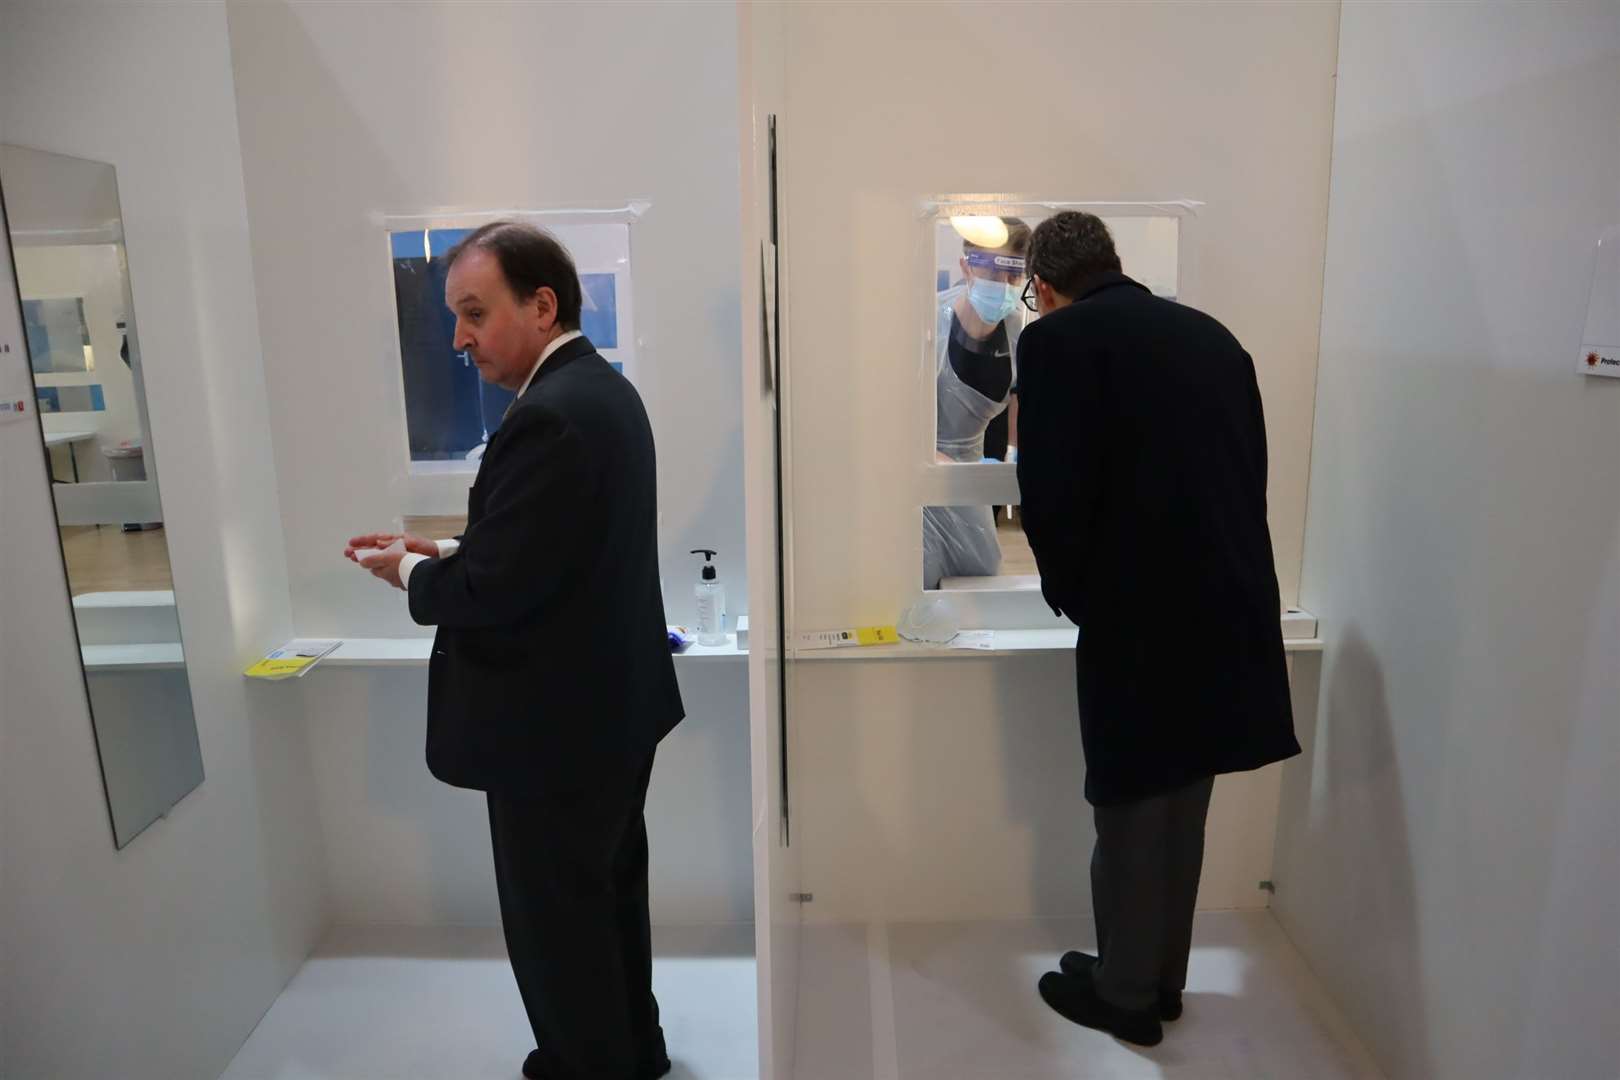 KCC leader Roger Gough, left, and Kent's director of public health Andrew Scott-Clark undergo a Covid test in Sheerness East WMC, Halfway, which opens as a mass public test centre on Friday